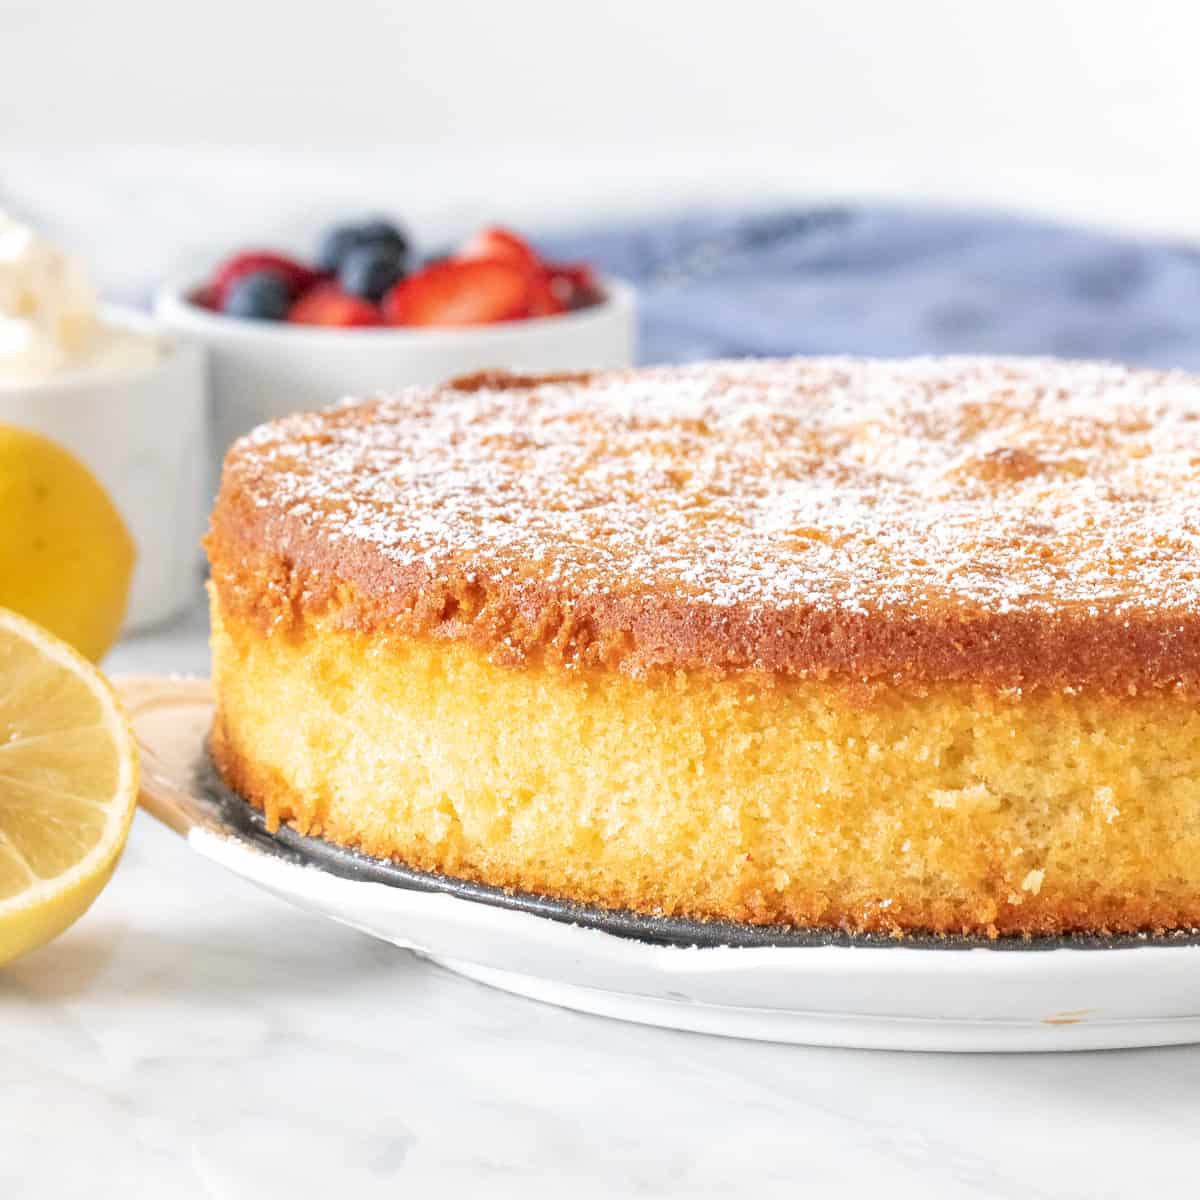 Round lemon olive oil cake with a sprinkle of powdered sugar.